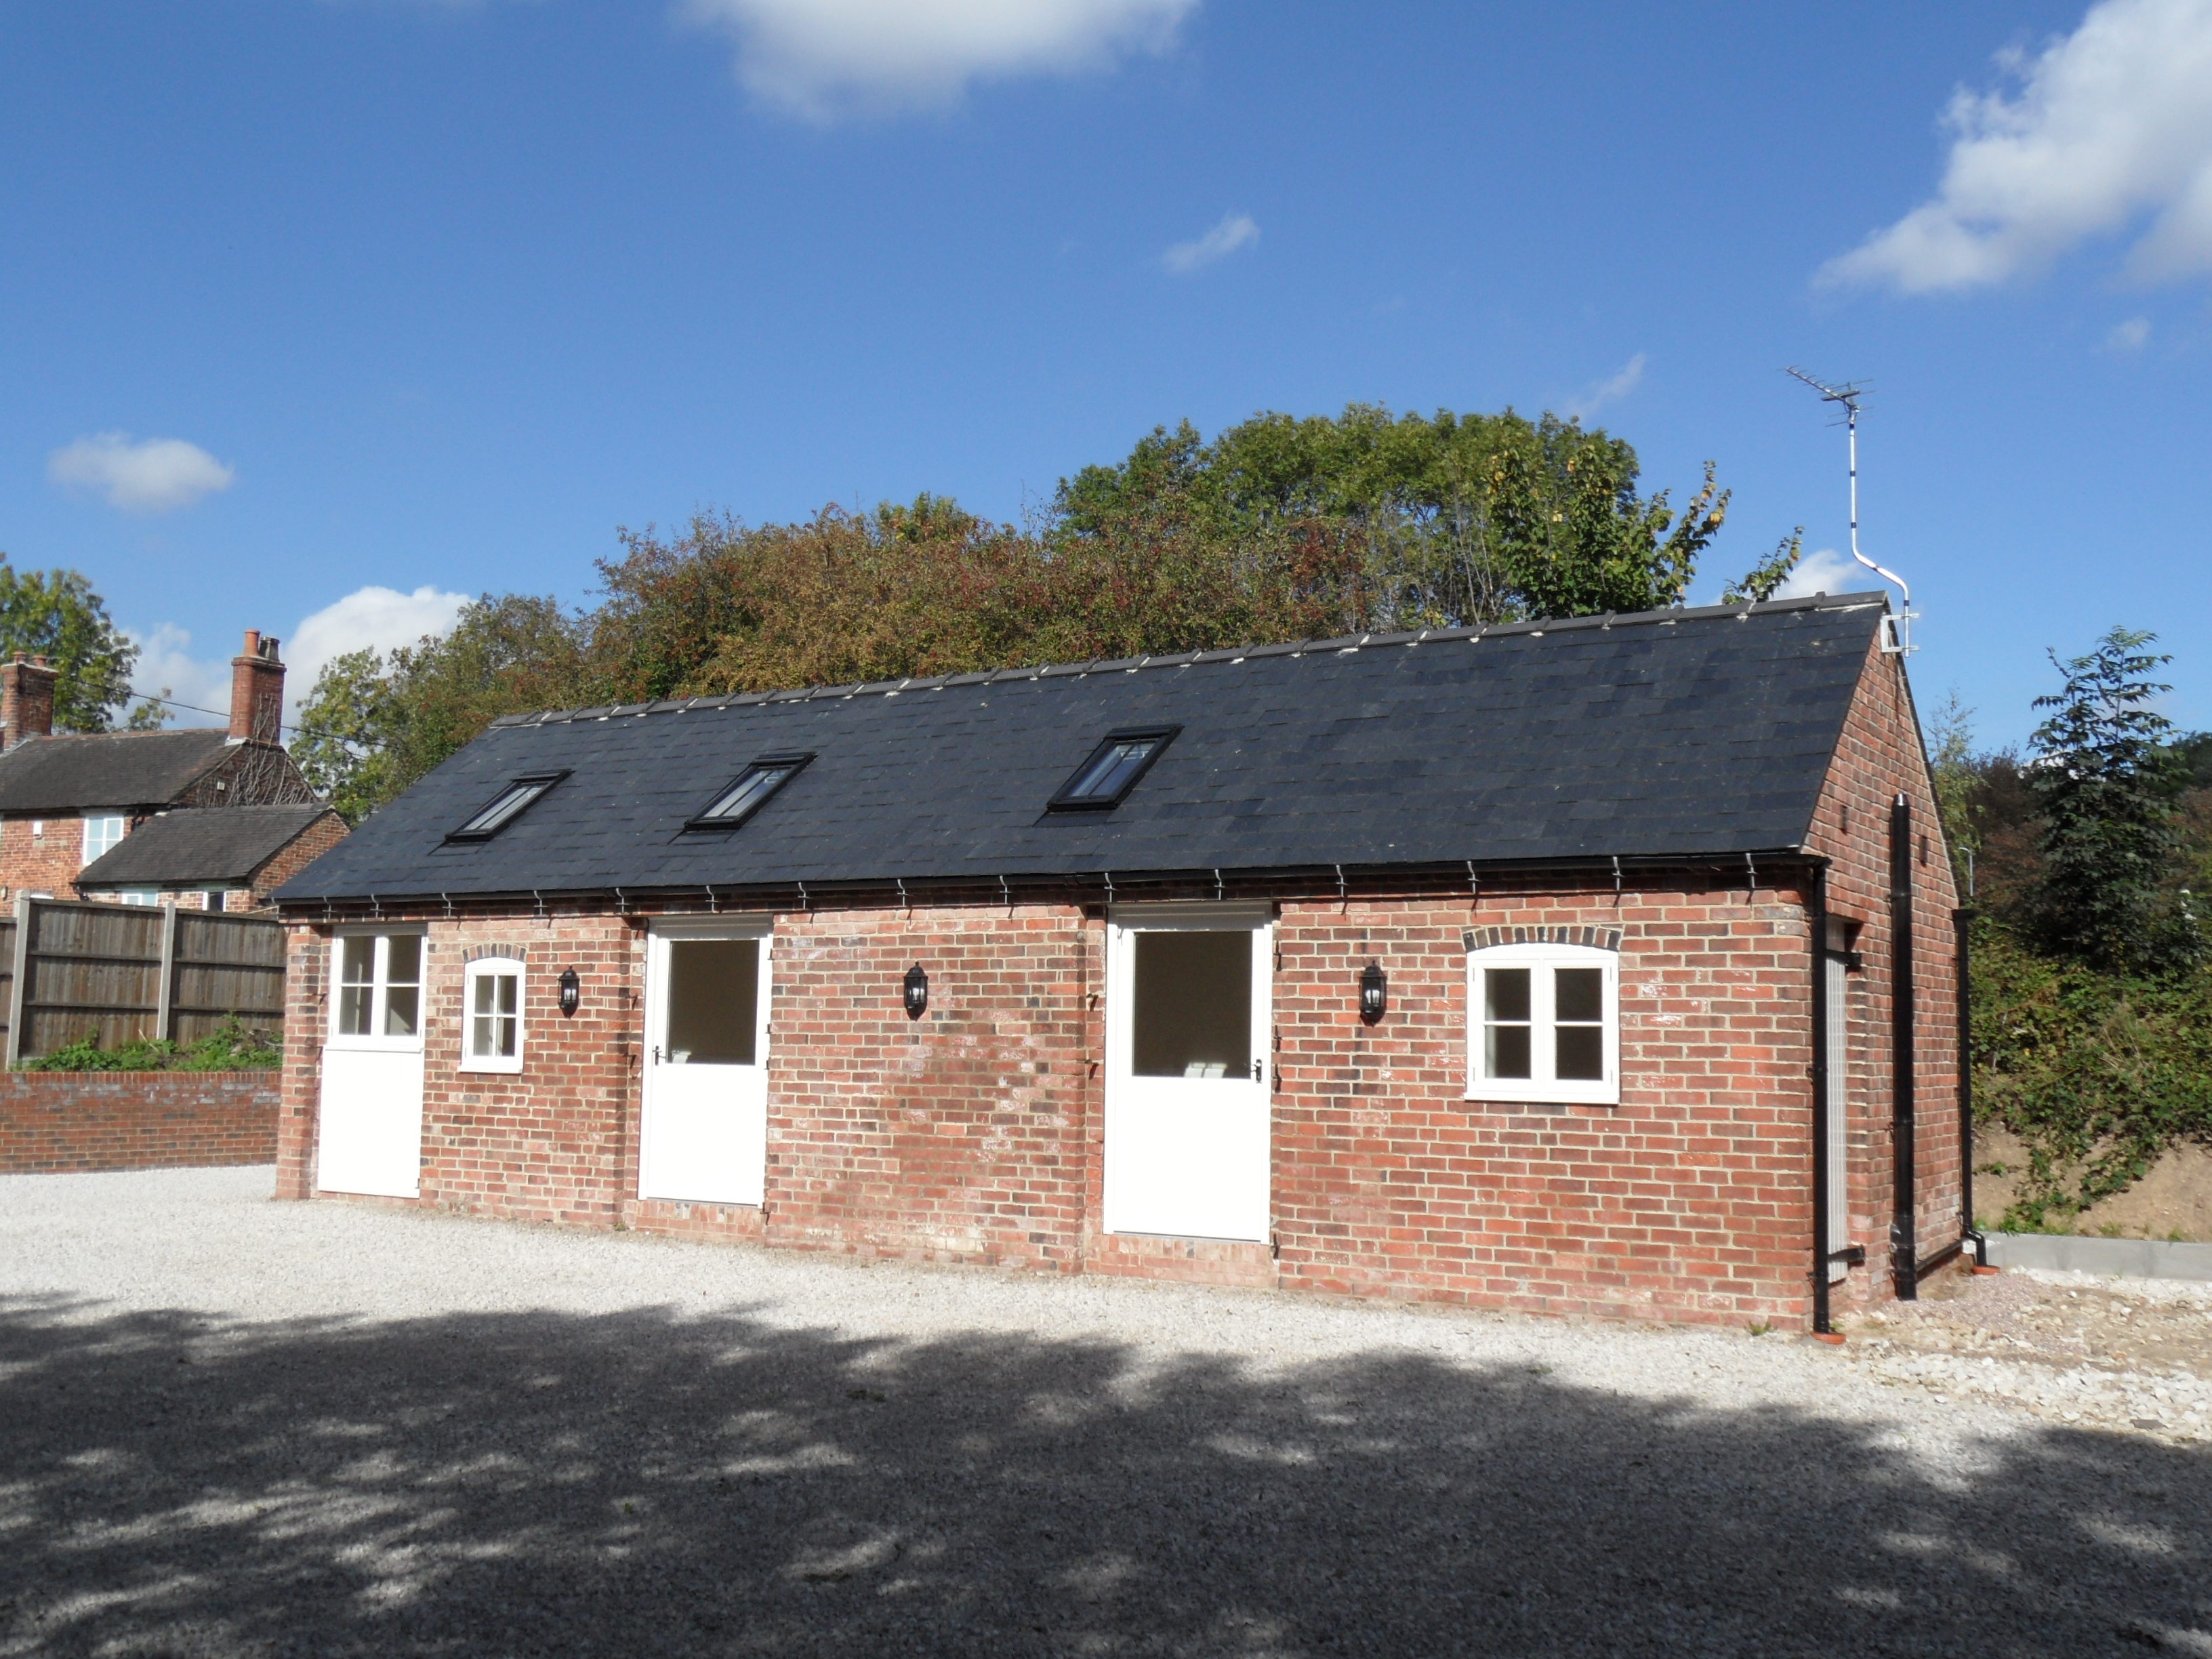 Barn conversion in Stenson offers stable working environment